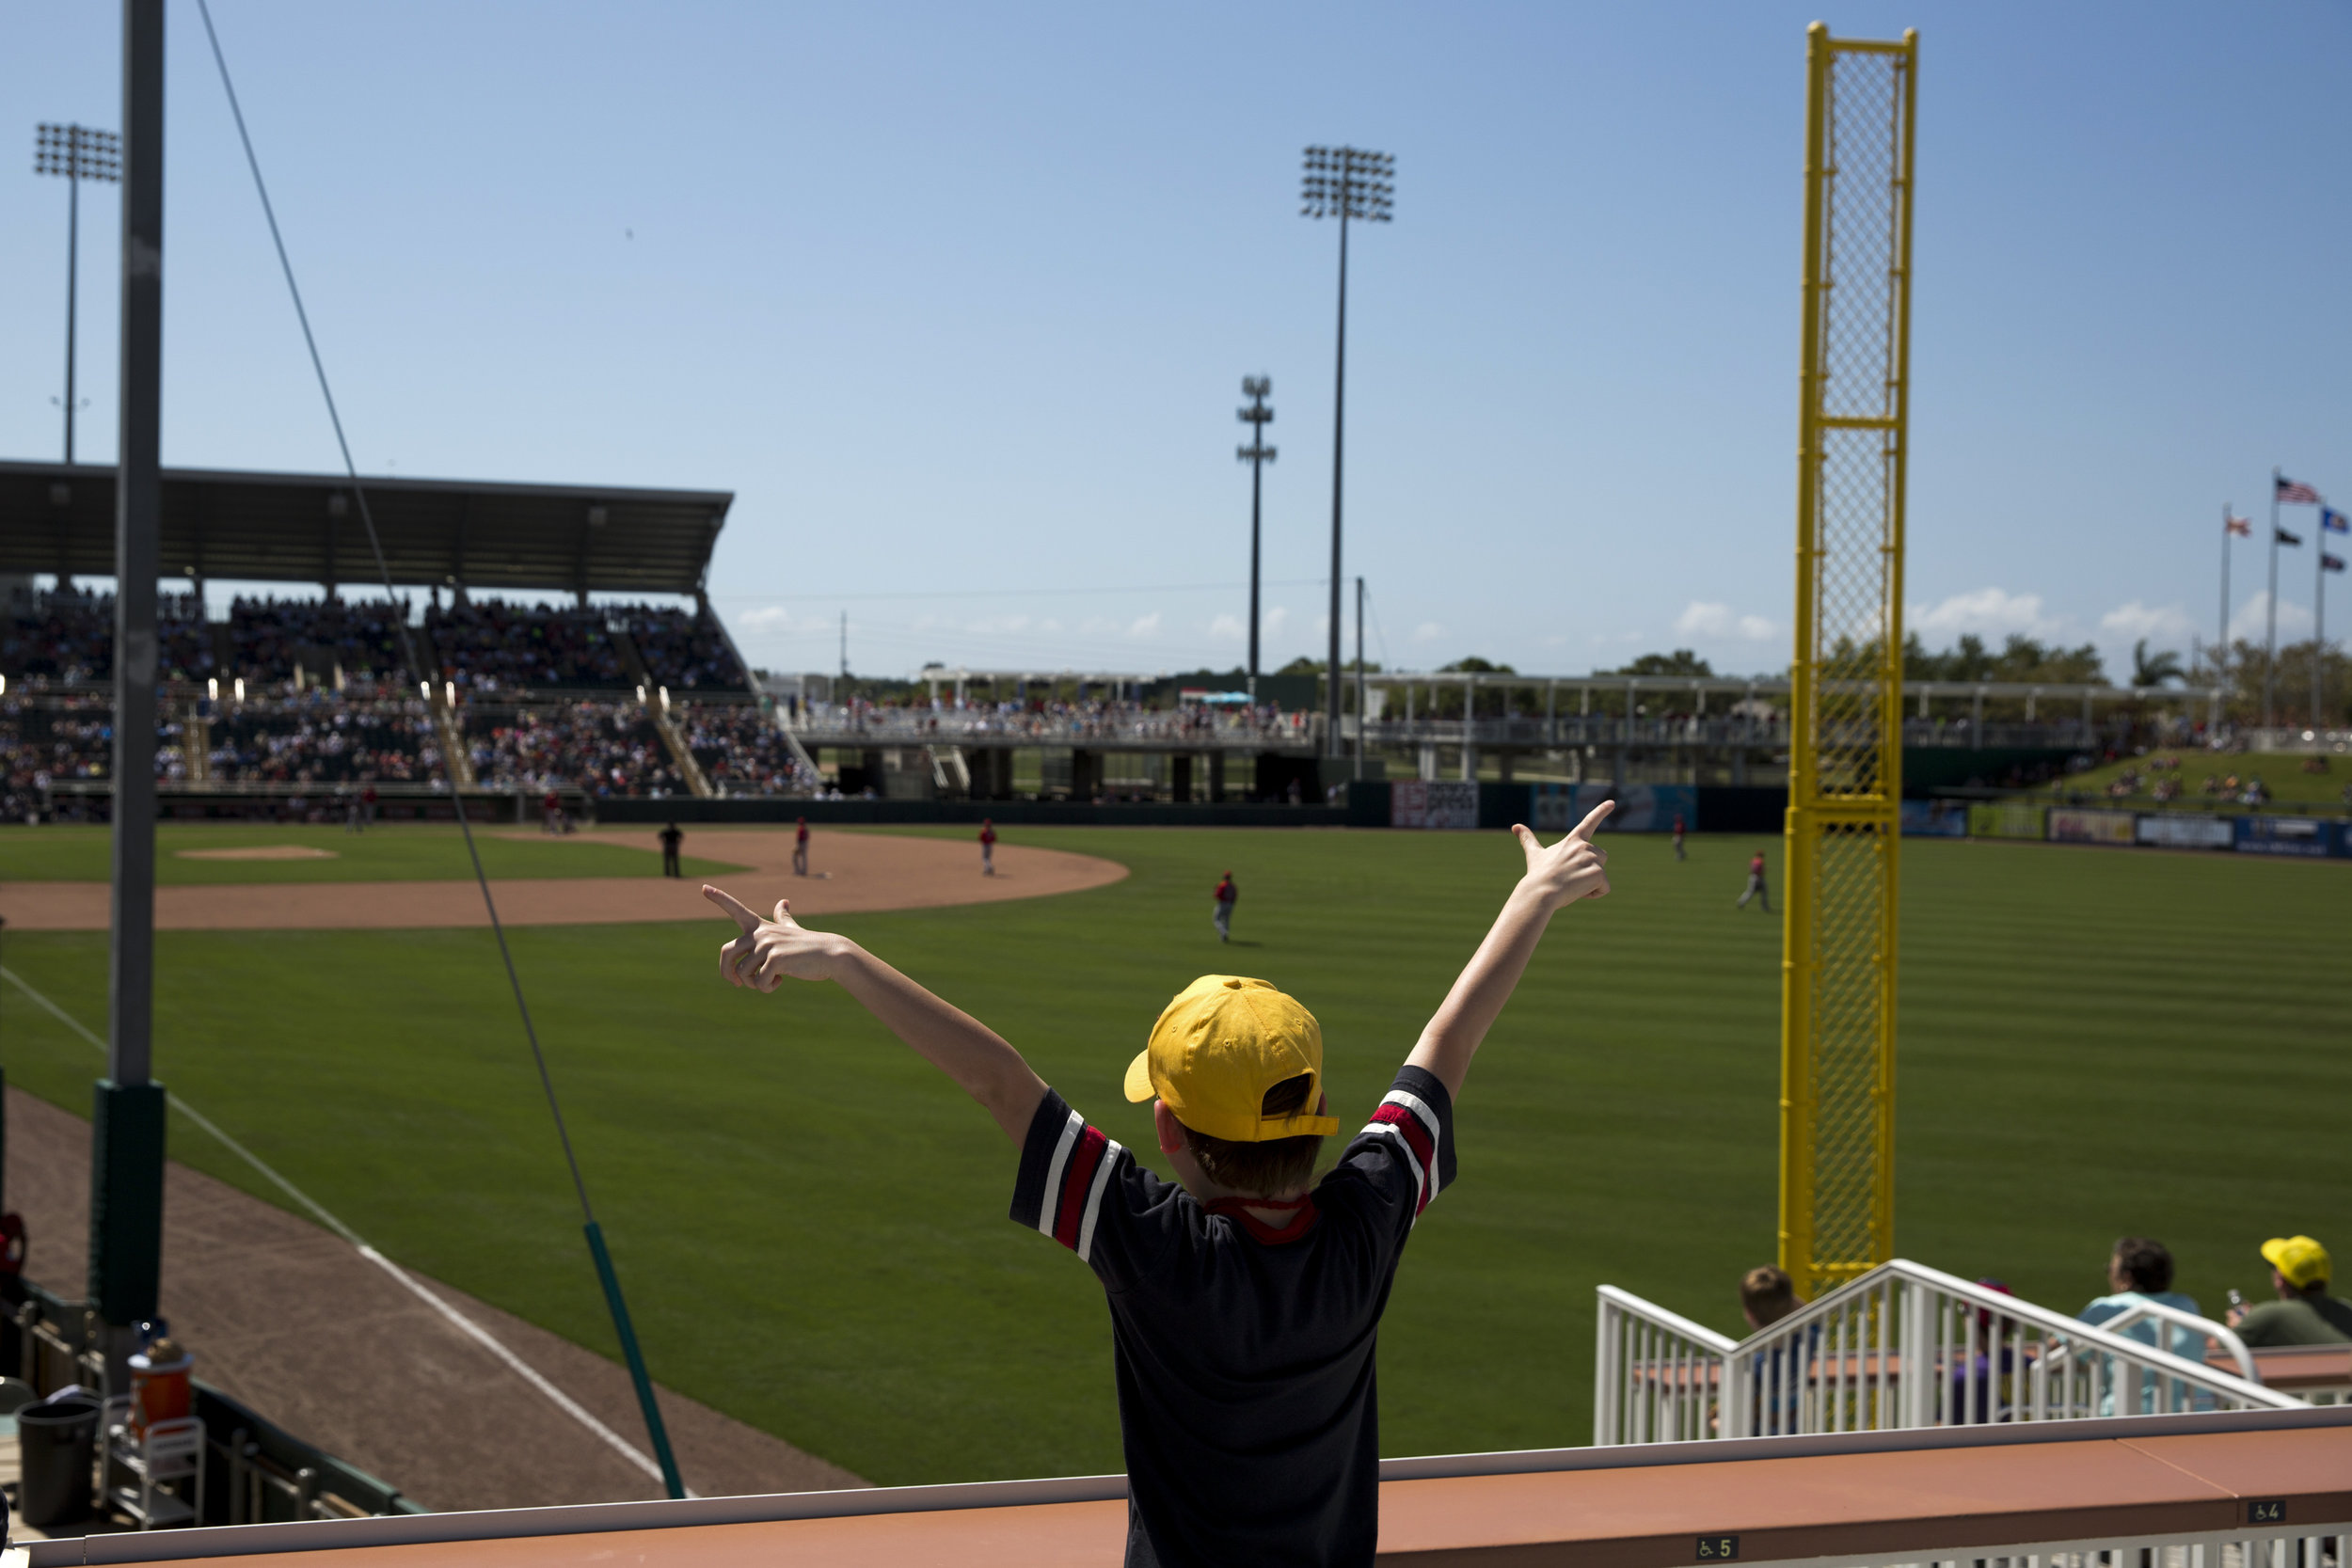  Twins fan Theo Bubser, 9, reacts to a Minnesota hit during a spring training game against the Boston Red Sox at Hammond Stadium in Fort Myers Thursday, March 31, 2016. The Twins would win 7-4 in their last home spring training game. 